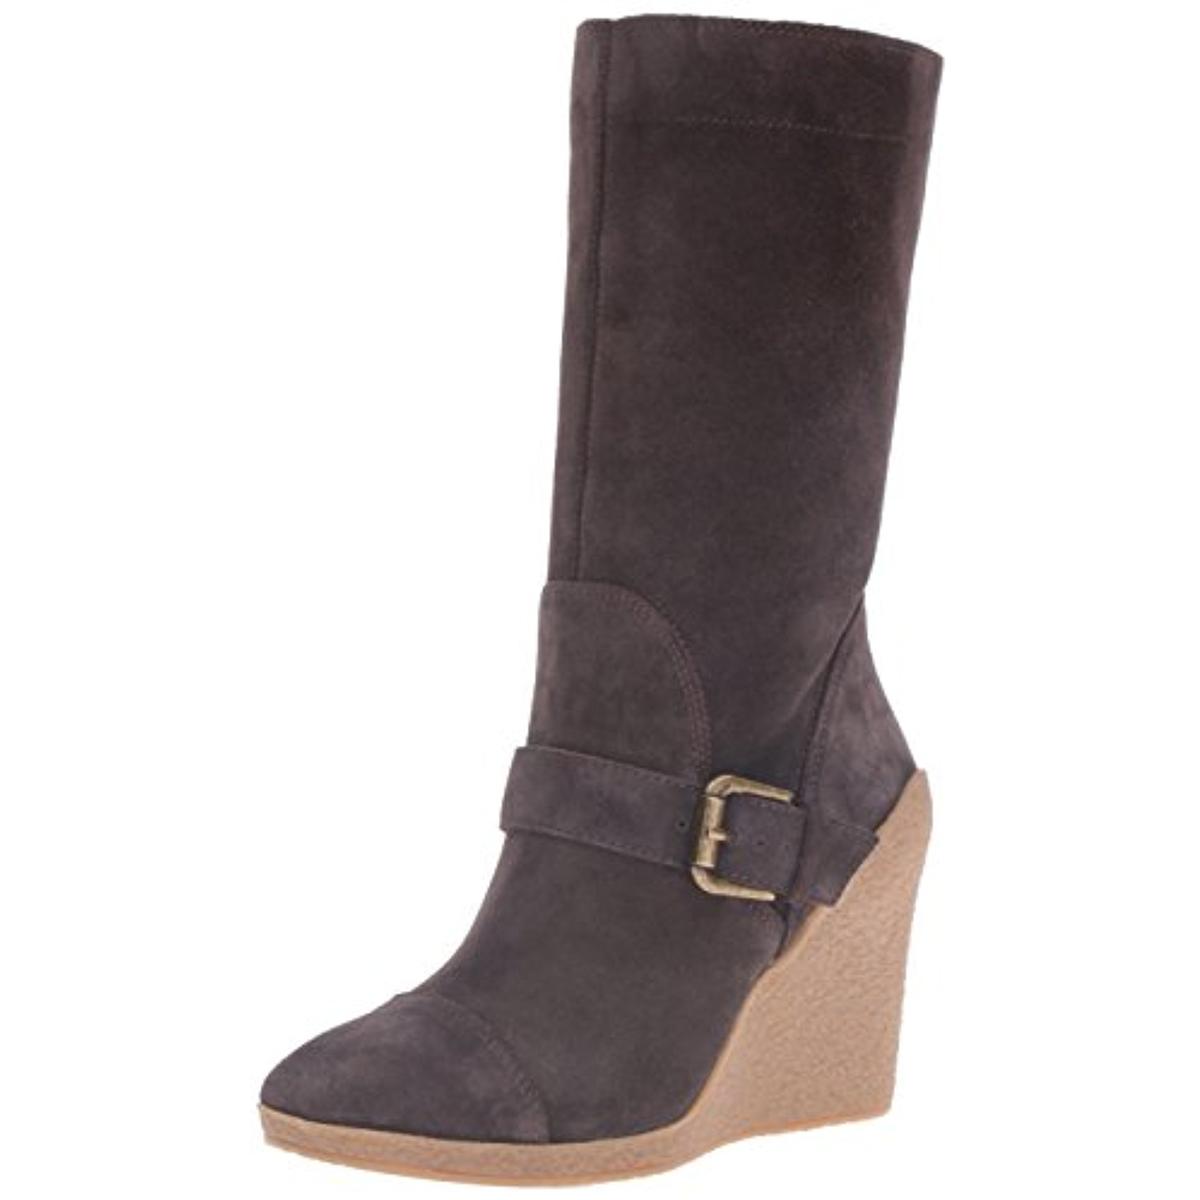 Nine West Darren Womens Suede Square Toe Wedge Boots